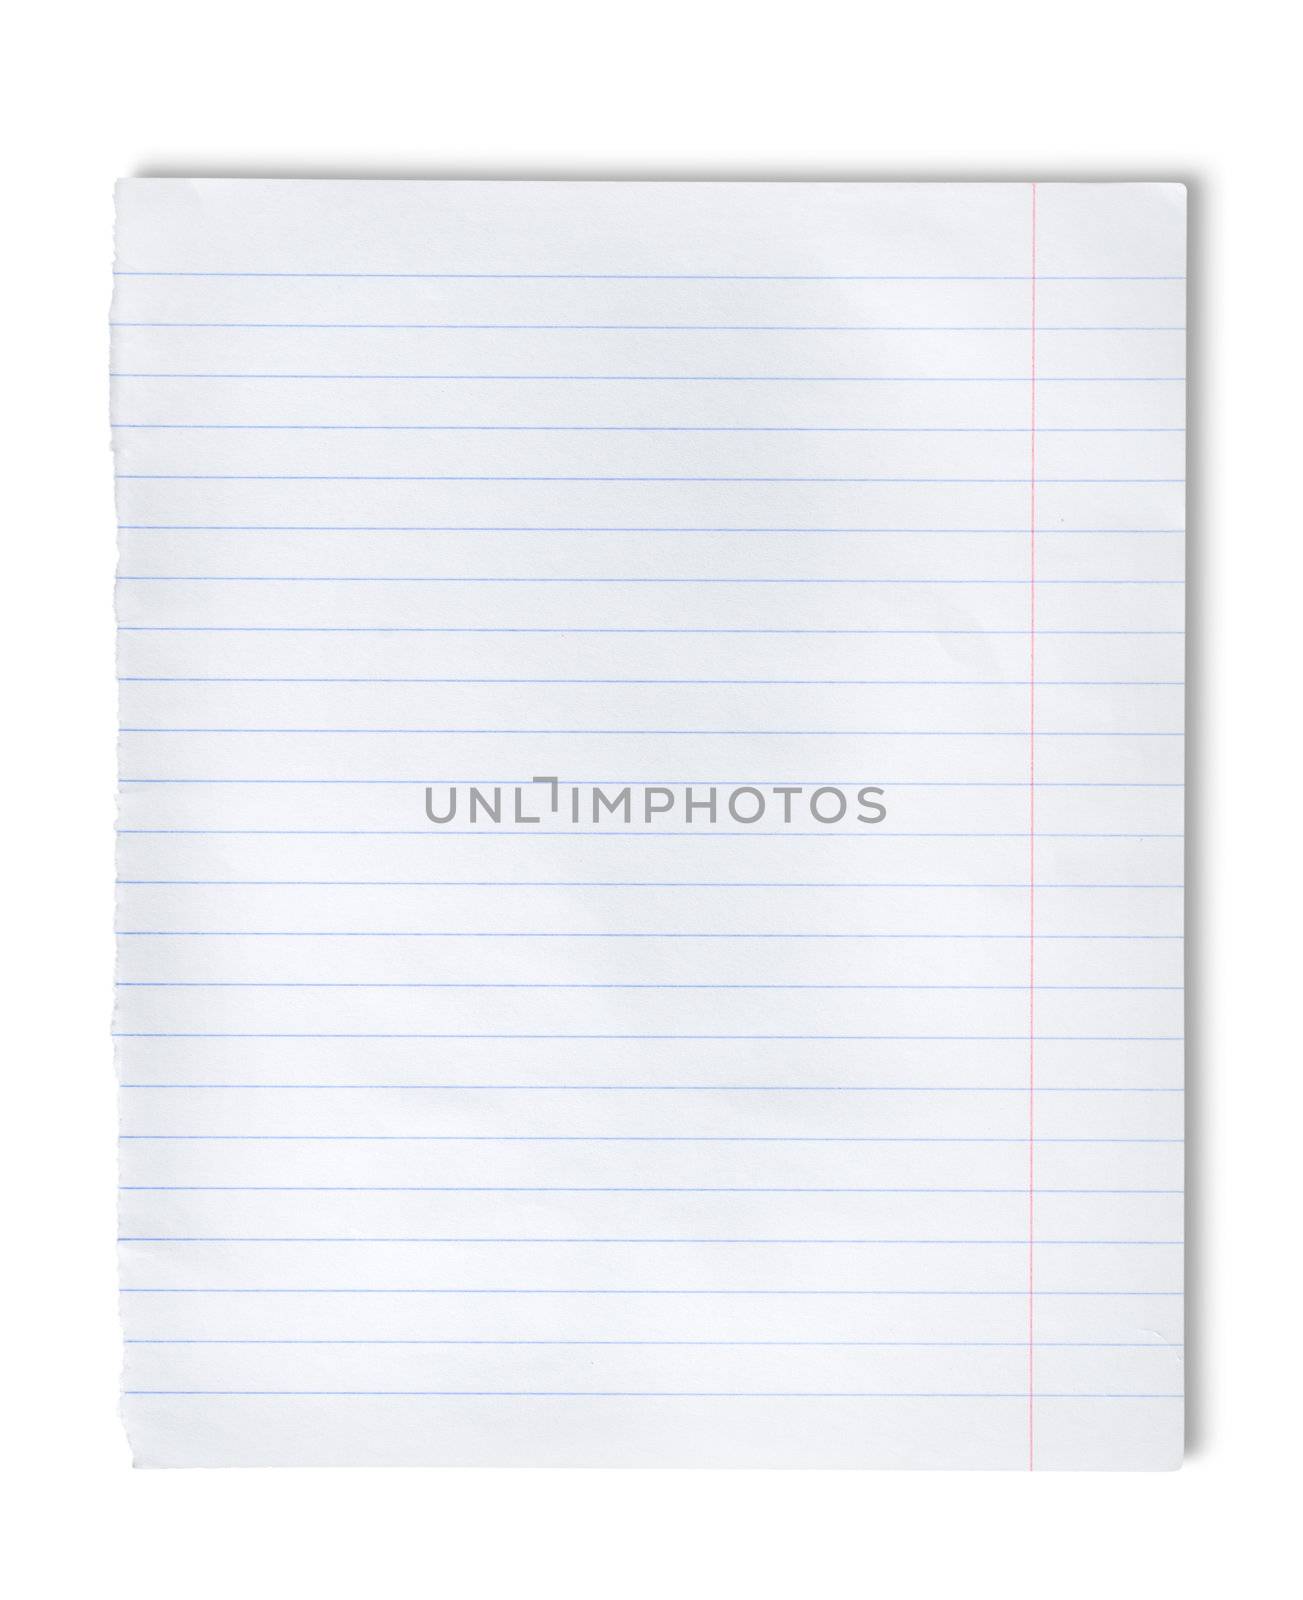 Lined paper by Givaga